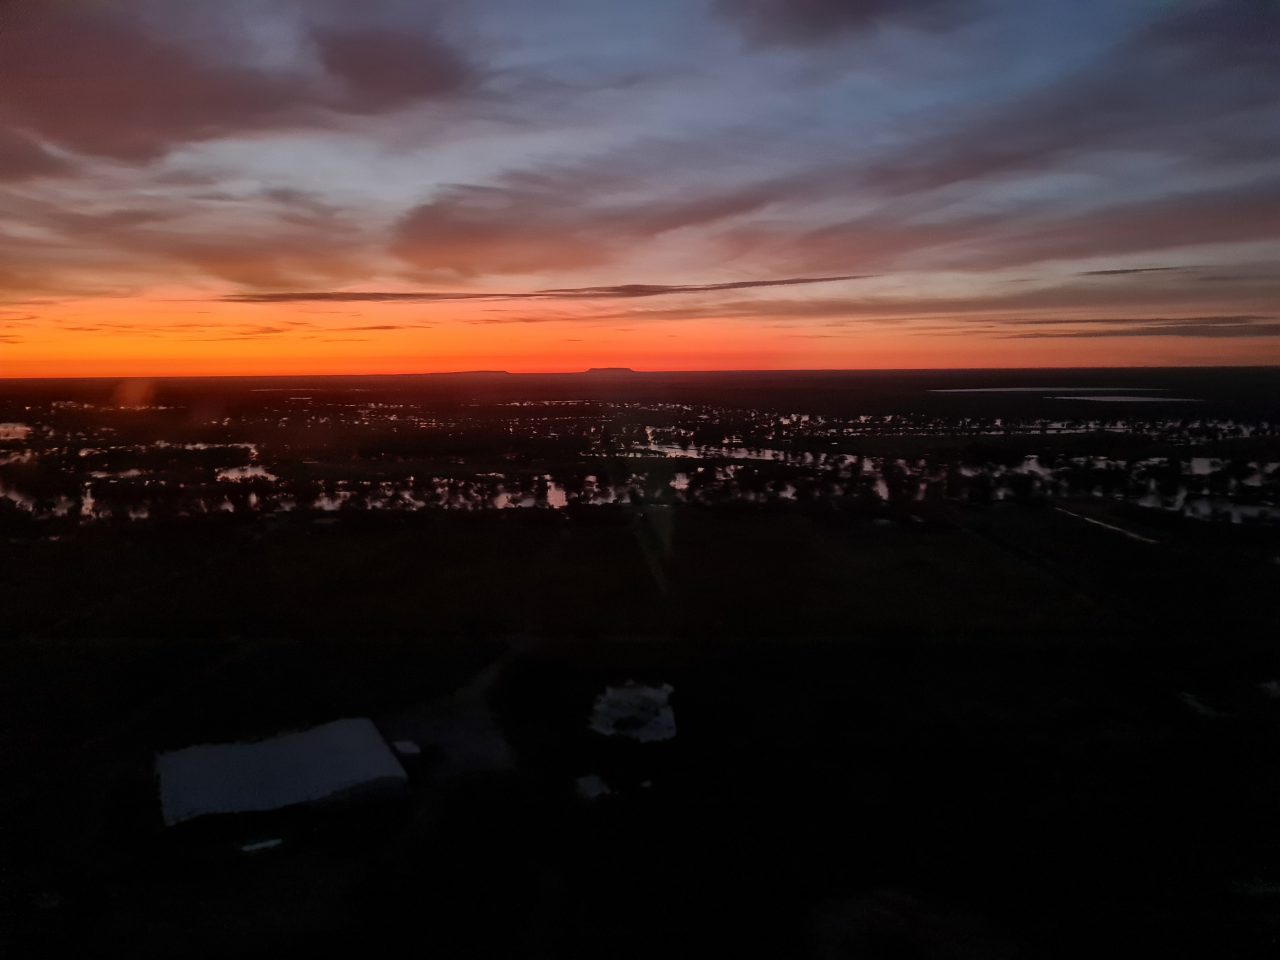 Aerial photo of sunrise over a river that is flooding with water inundating trees. The water is light coloured from the reflection of the sky. The horizon is specatualr with red and orange colours the foreground is dark in contrast